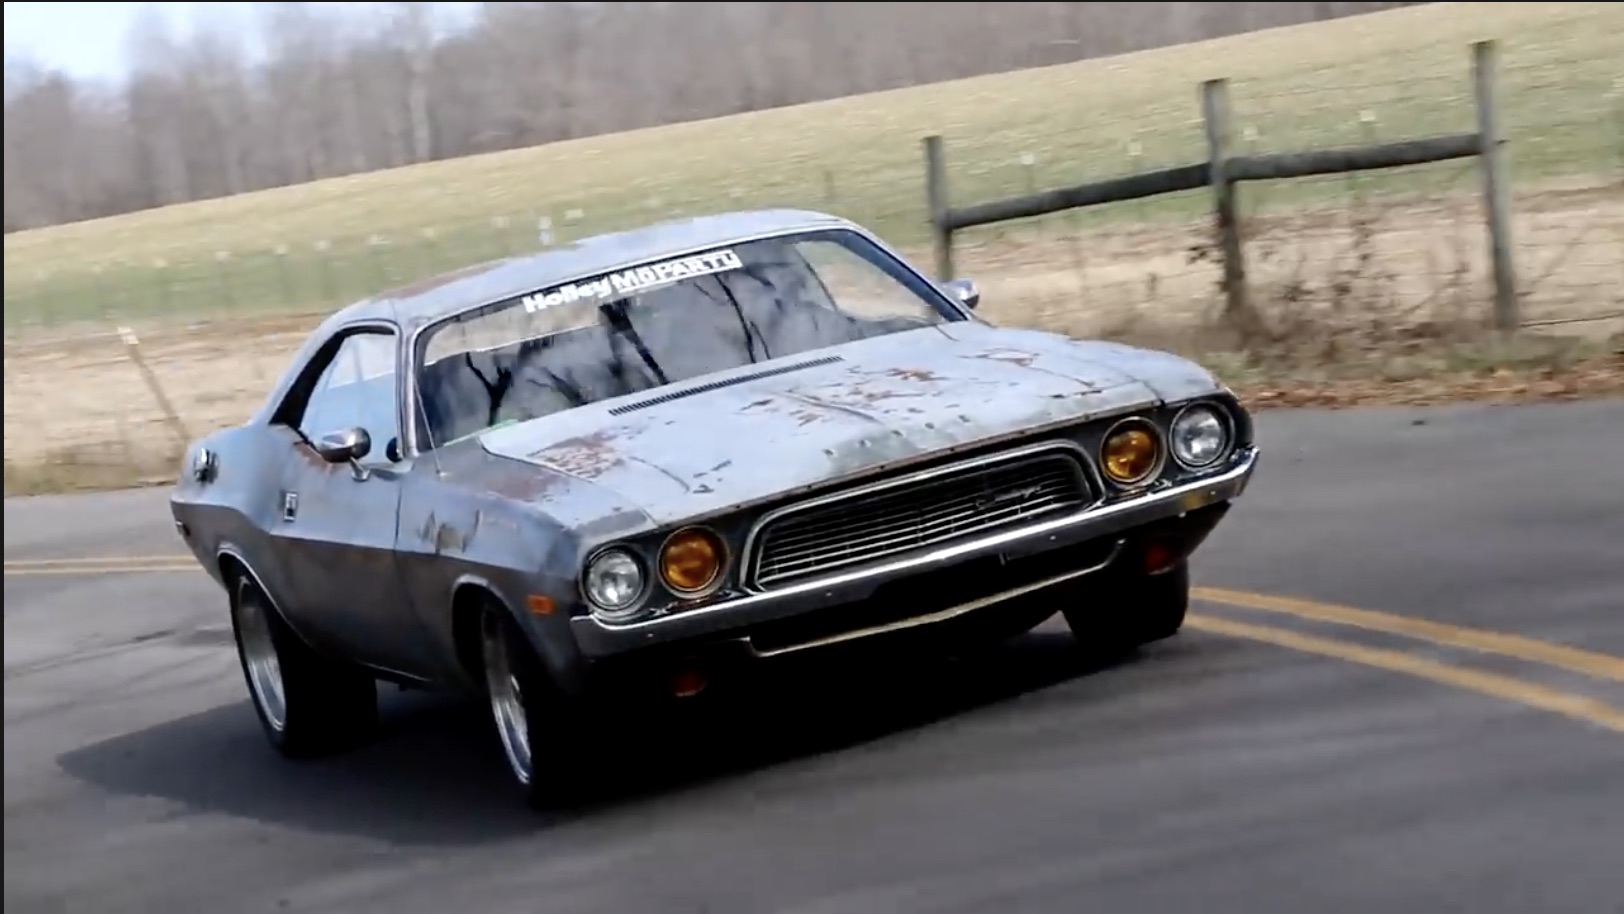 The Challenger Revival, The Final Episode – From Rusting Hulk To Dream Machine